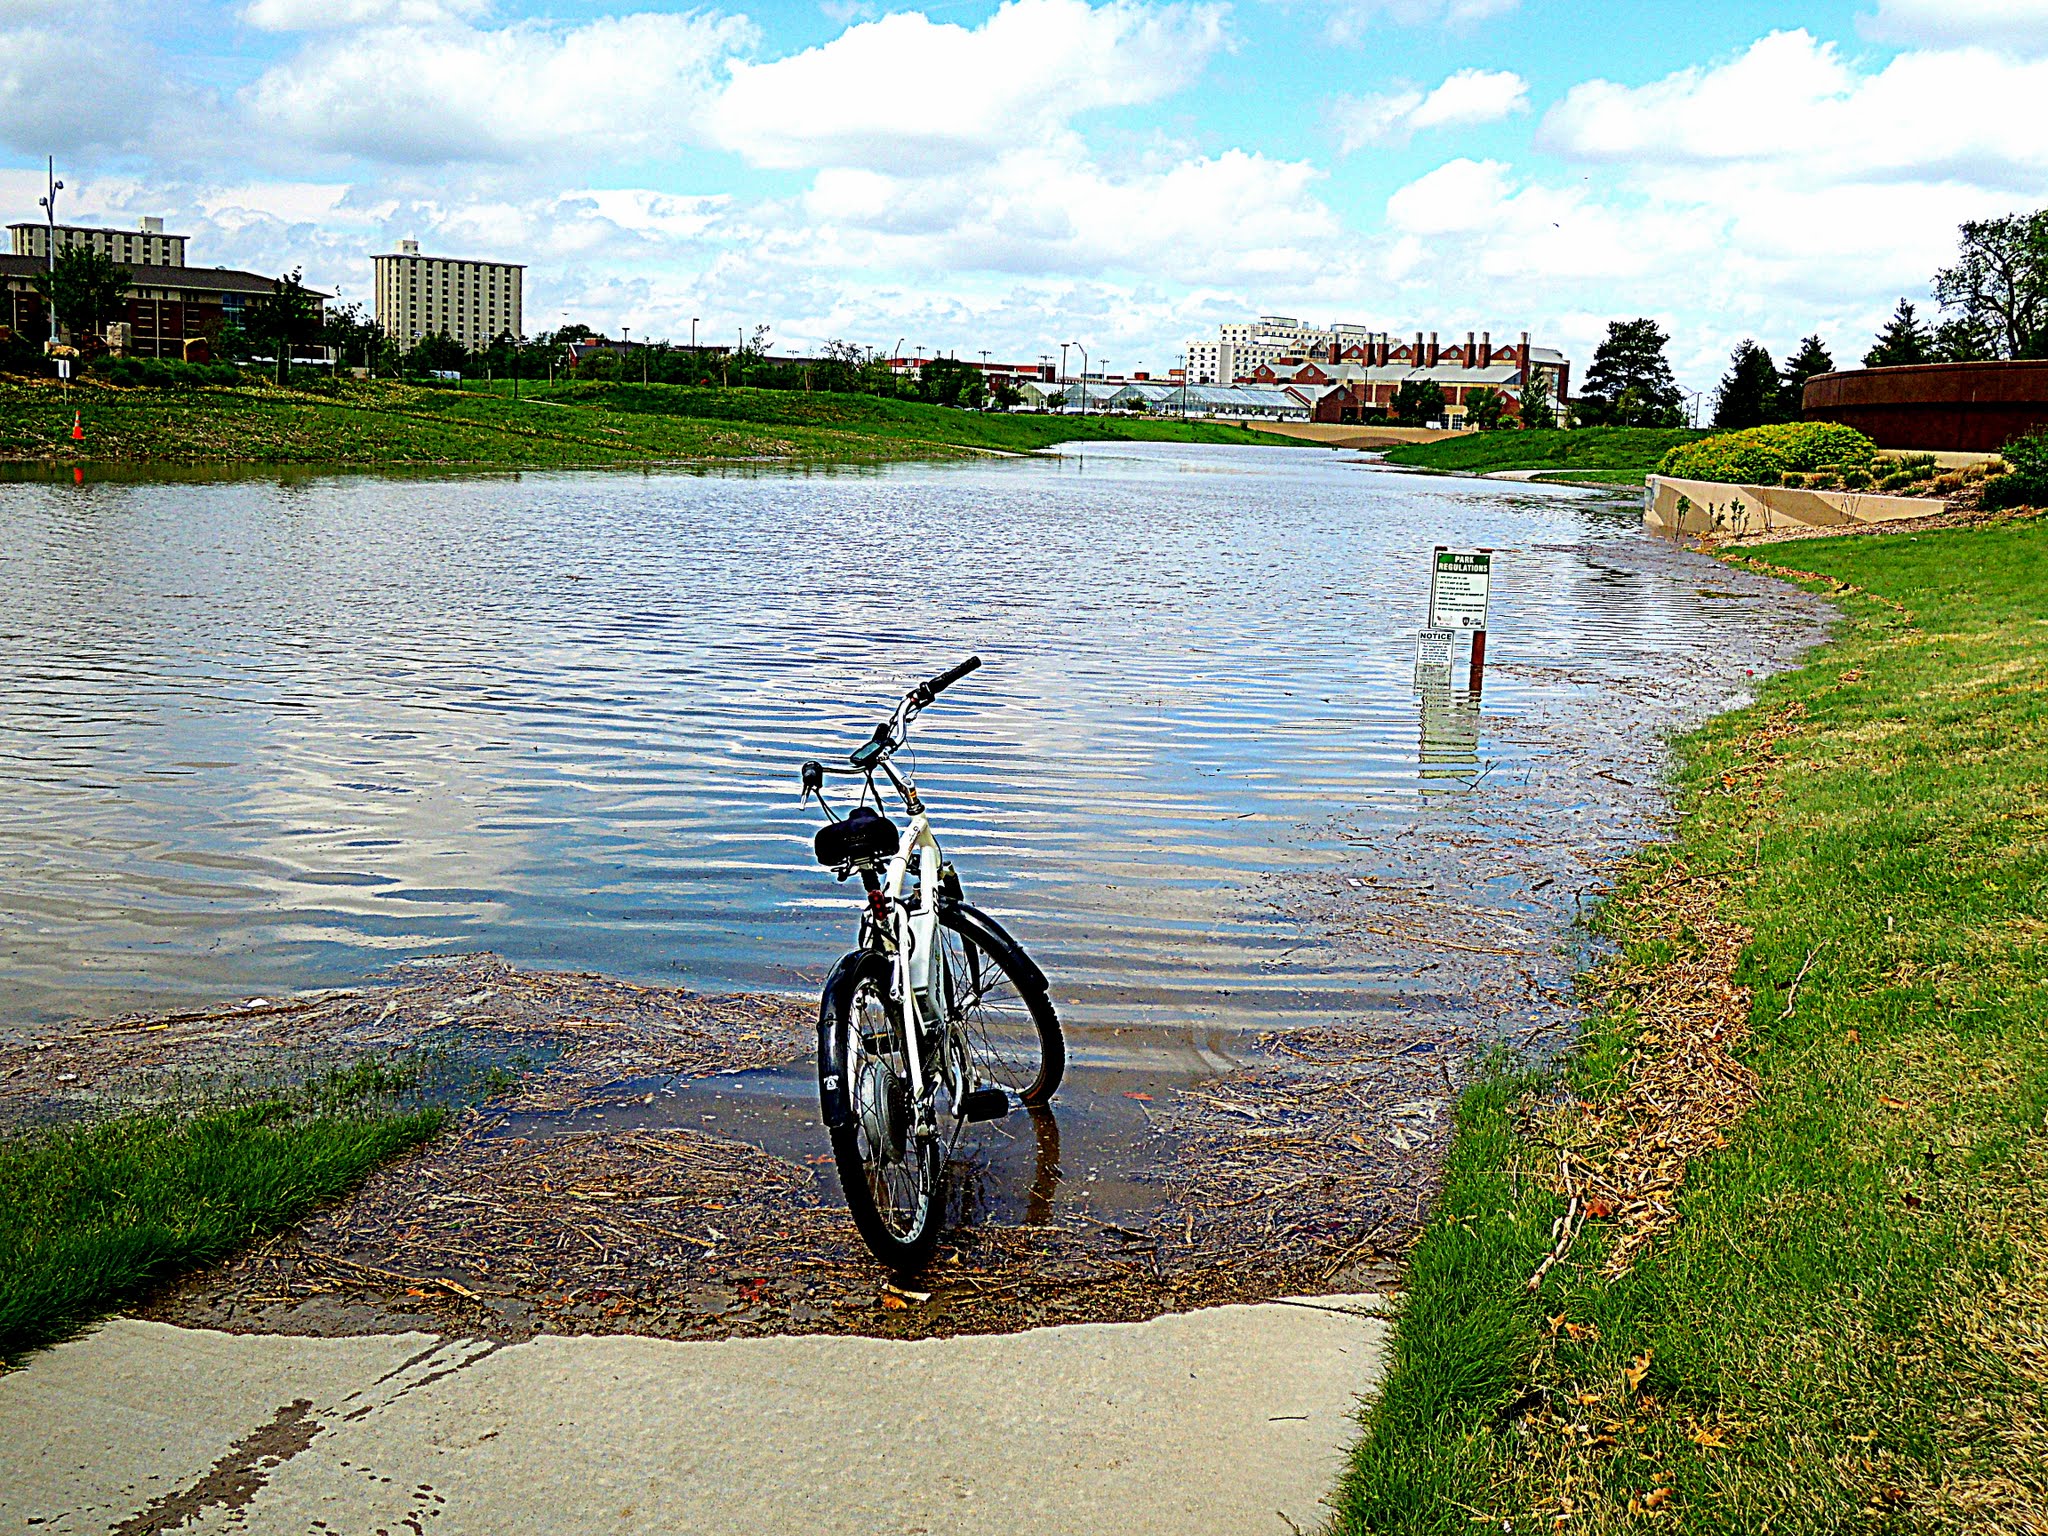 my bike in the waters of Union Plaza flooded